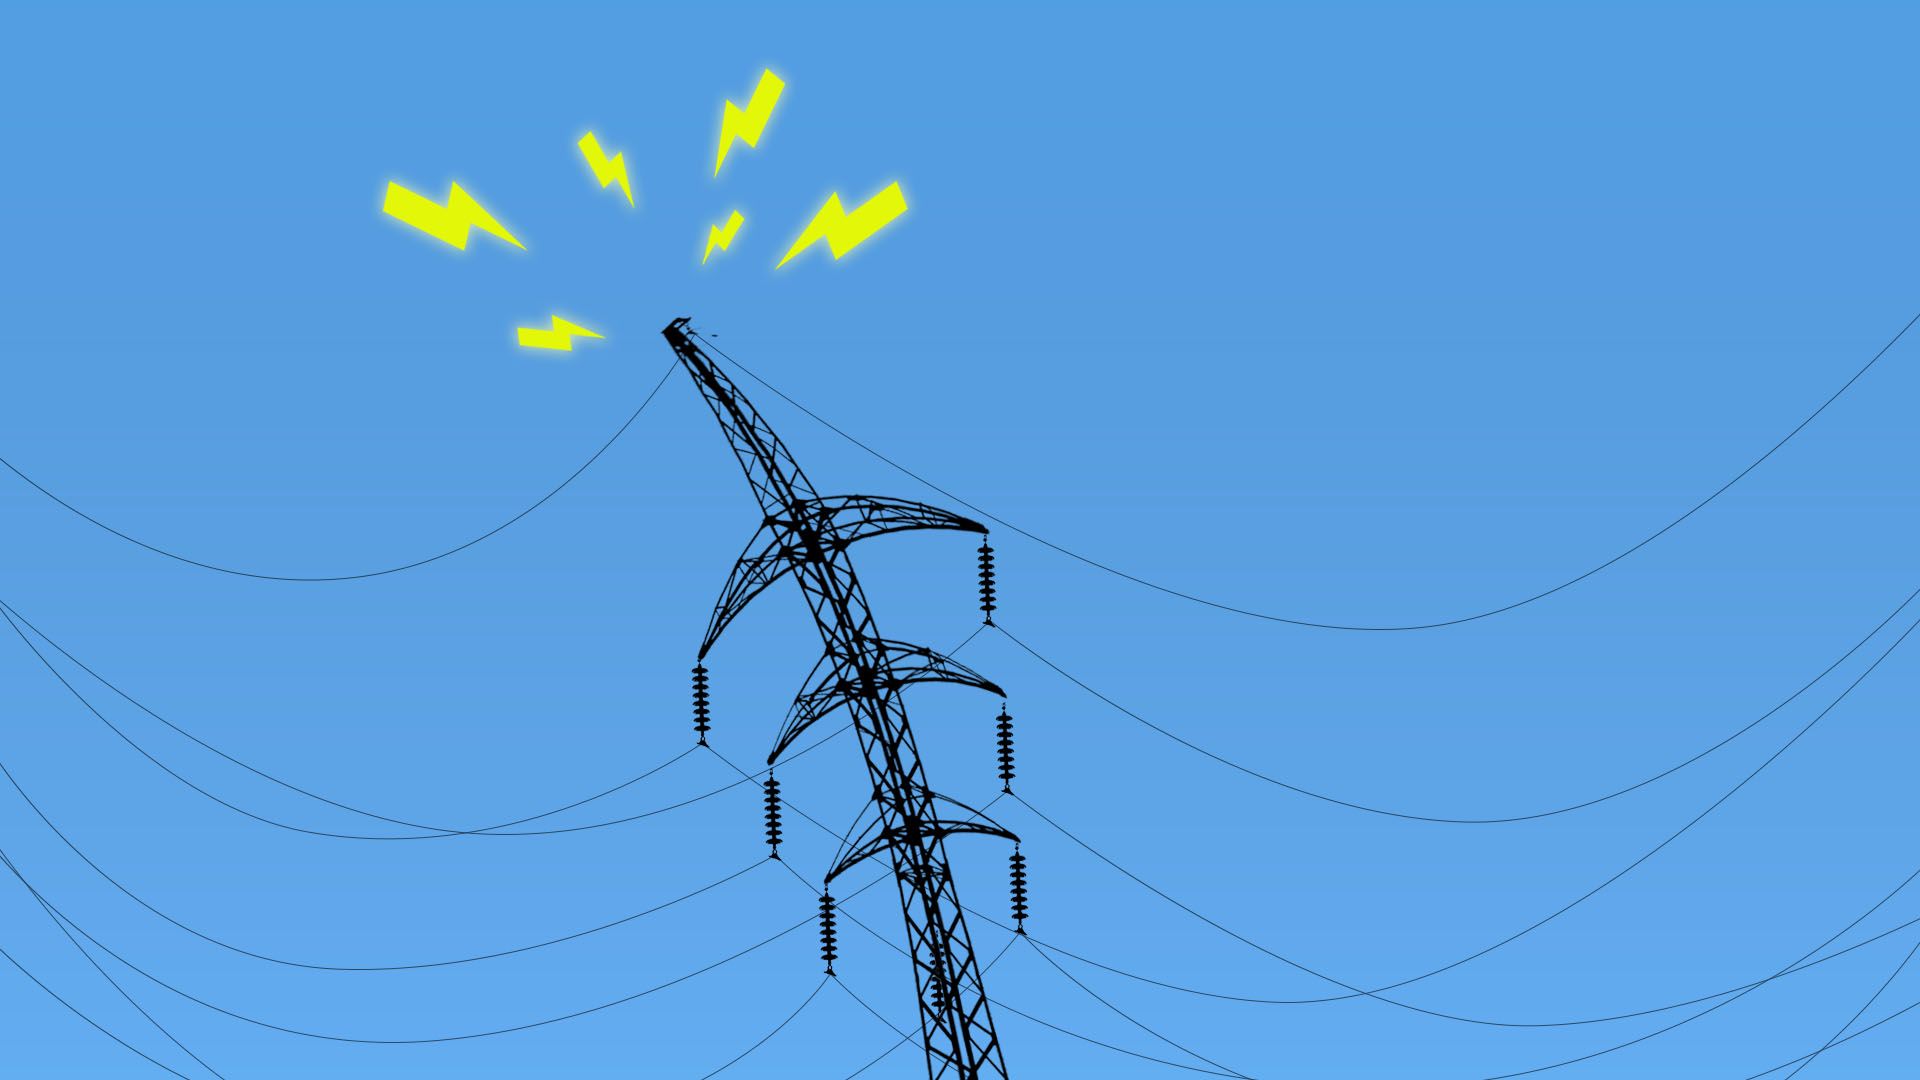 Illustration of a power line struggling under the weight of electrical wires